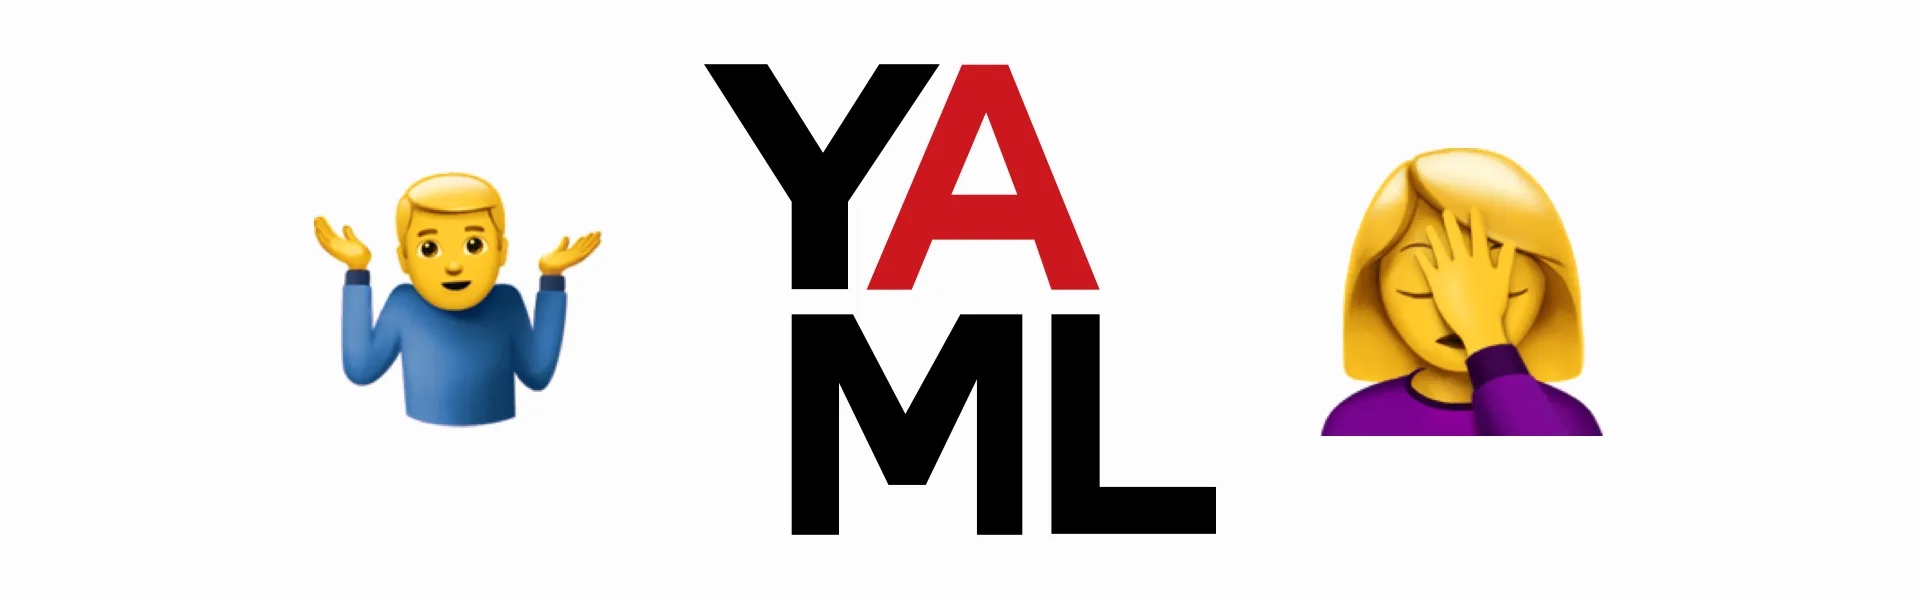 The yaml logo and two emoji, one shrugging and the other face palming